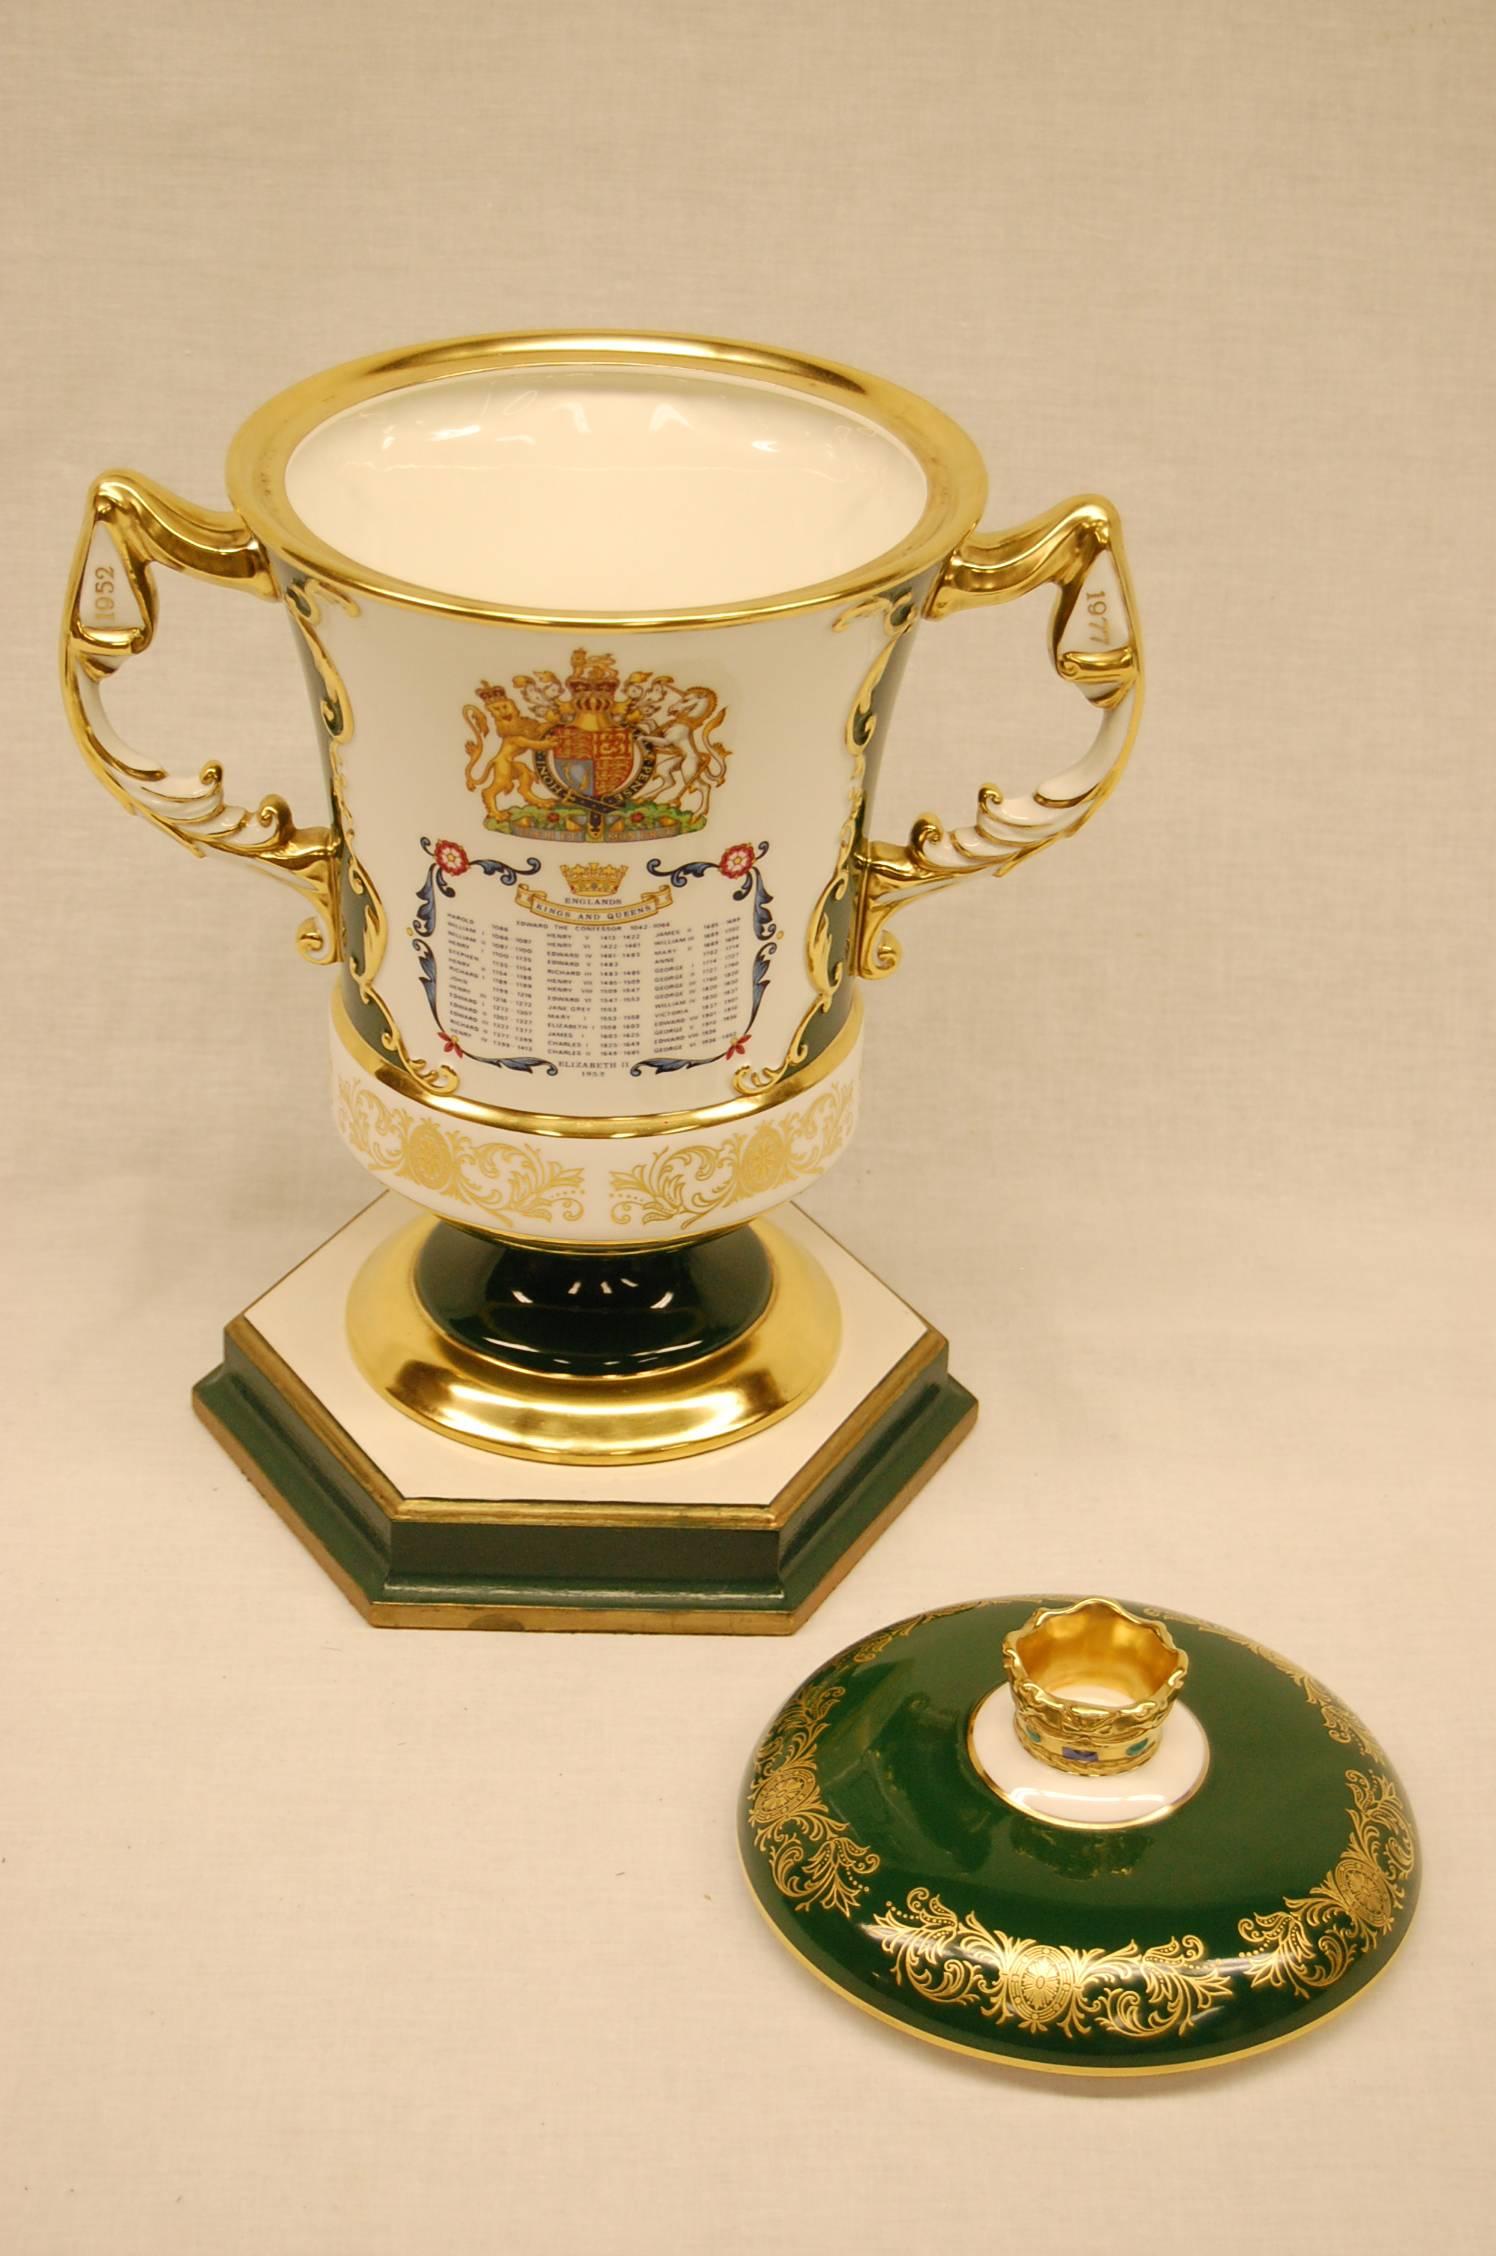 English Porcelain Urn by Aynsley to Commemorate QE II Silver Jubilee, Buckingham Palace